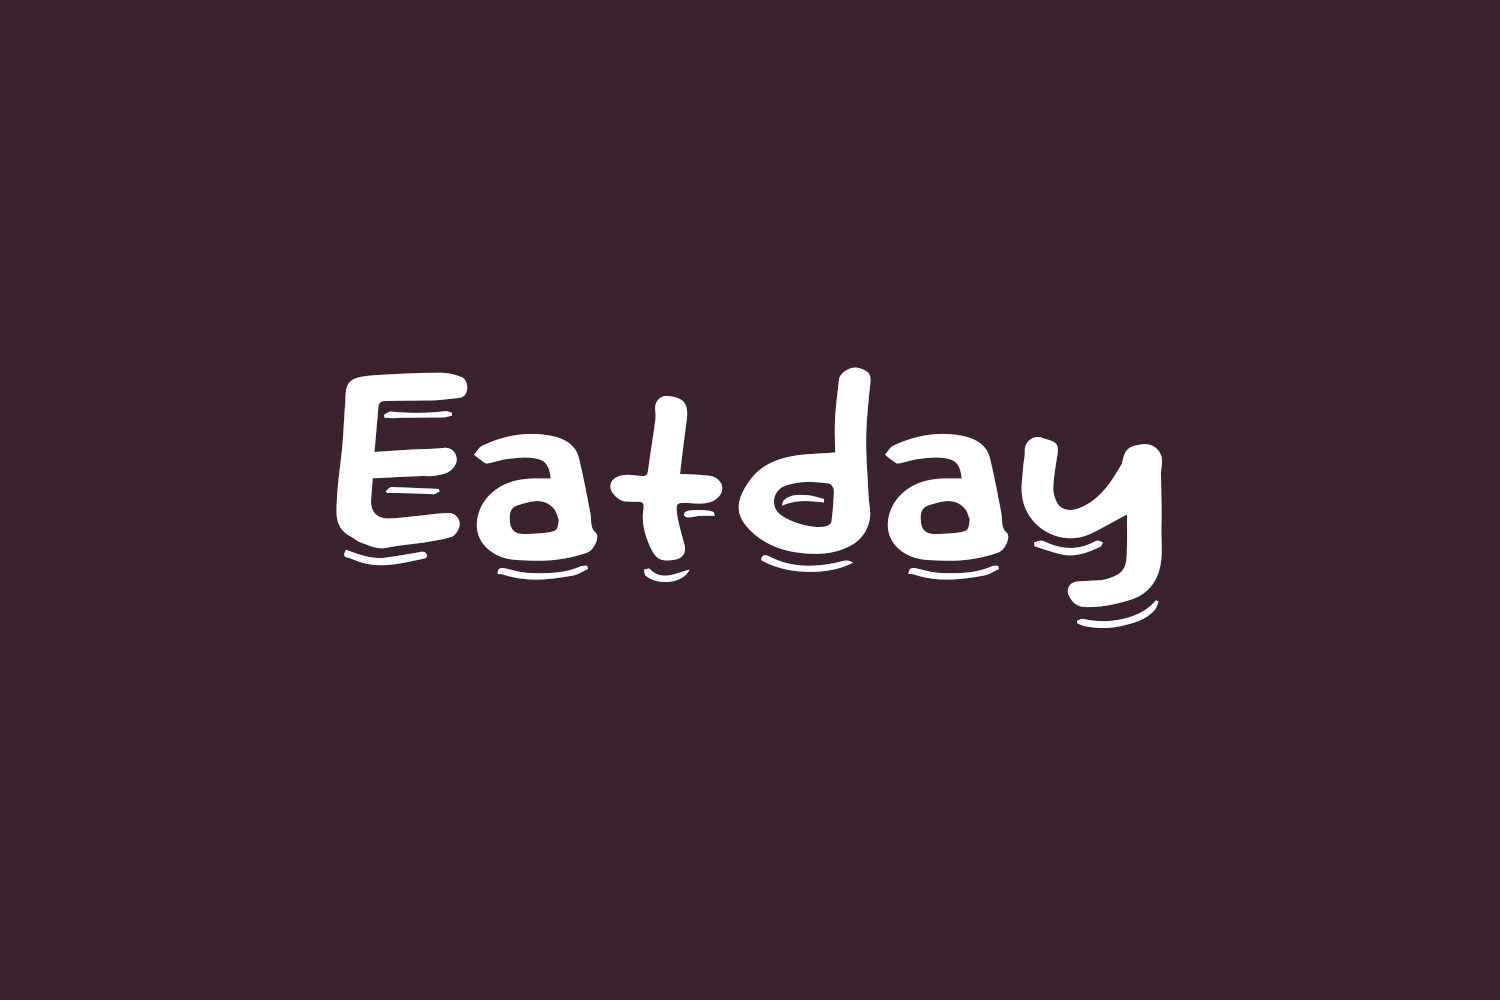 Eatday Free Font